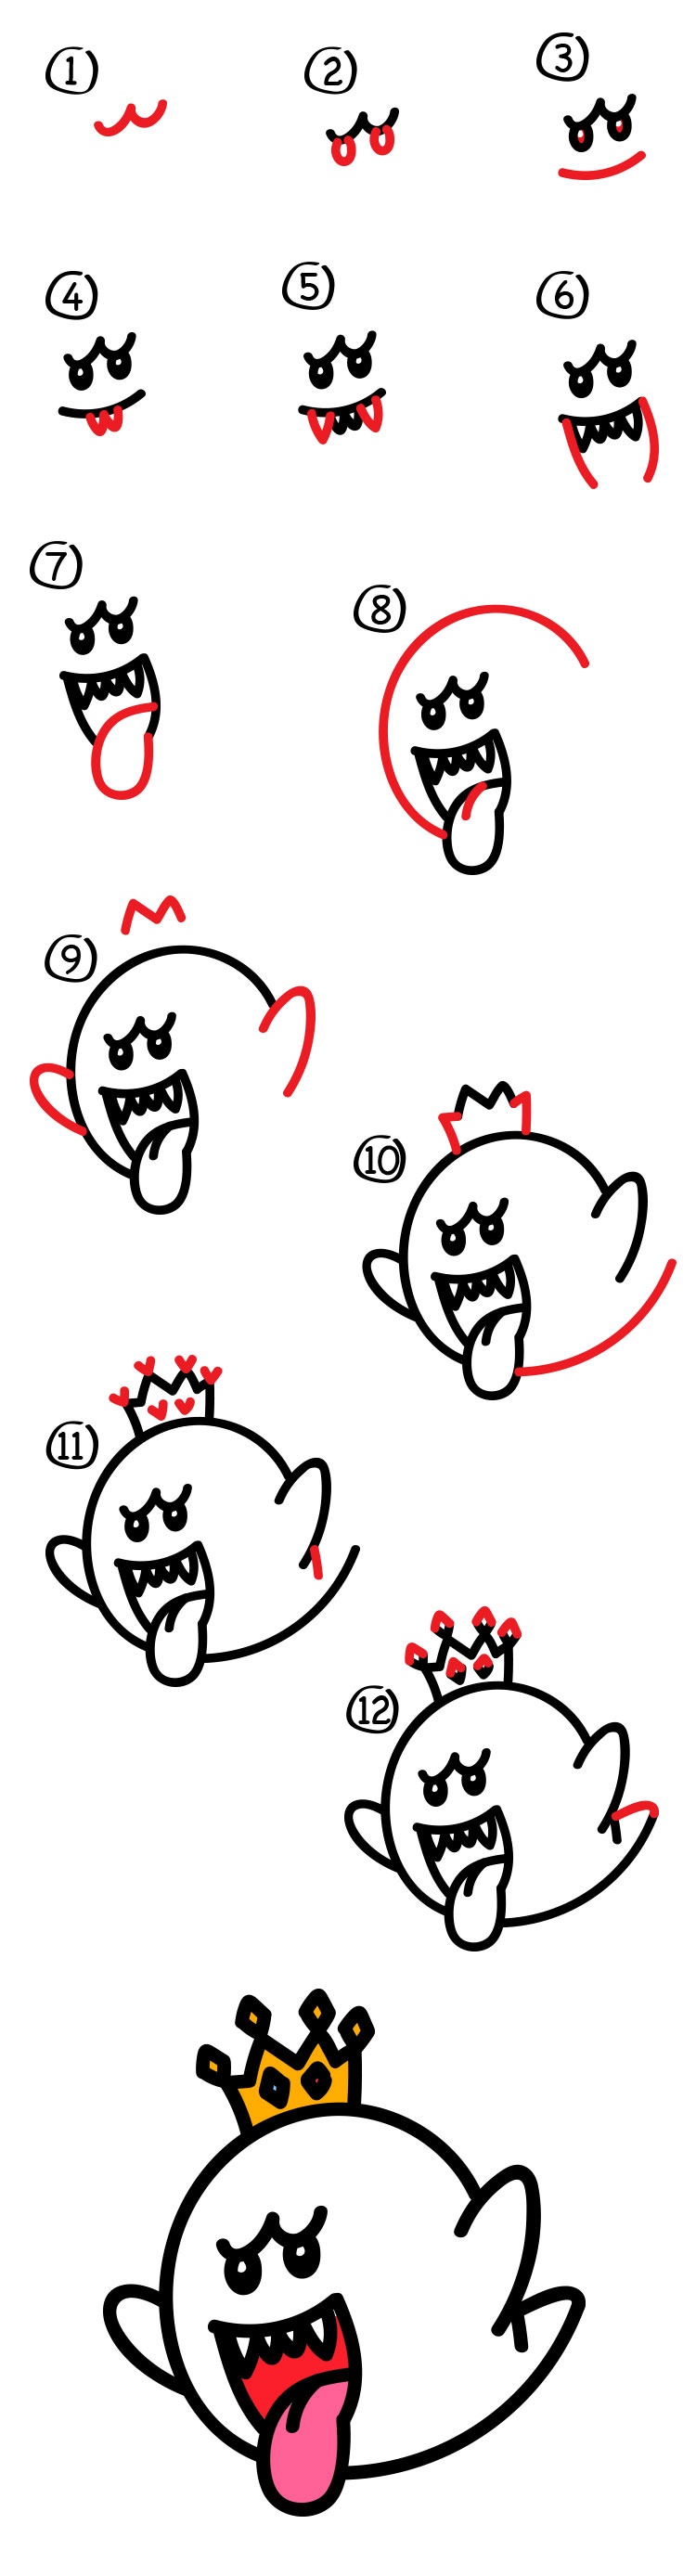 How To Draw King Boo From Mario Art For Kids Hub